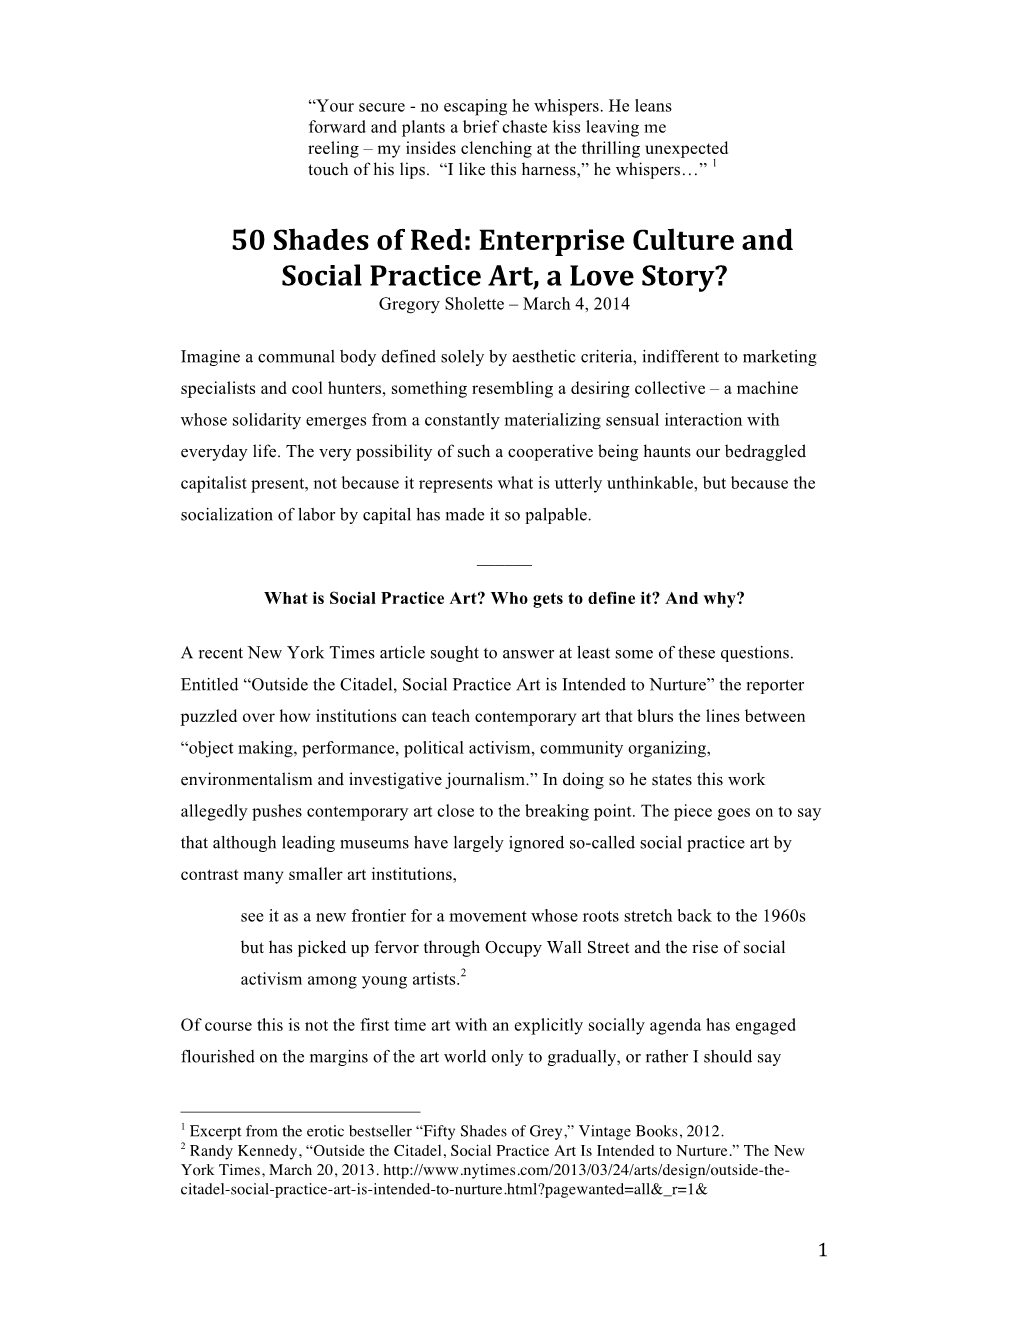 50 Shades of Red: Enterprise Culture and Social Practice Art, a Love Story? Gregory Sholette – March 4, 2014